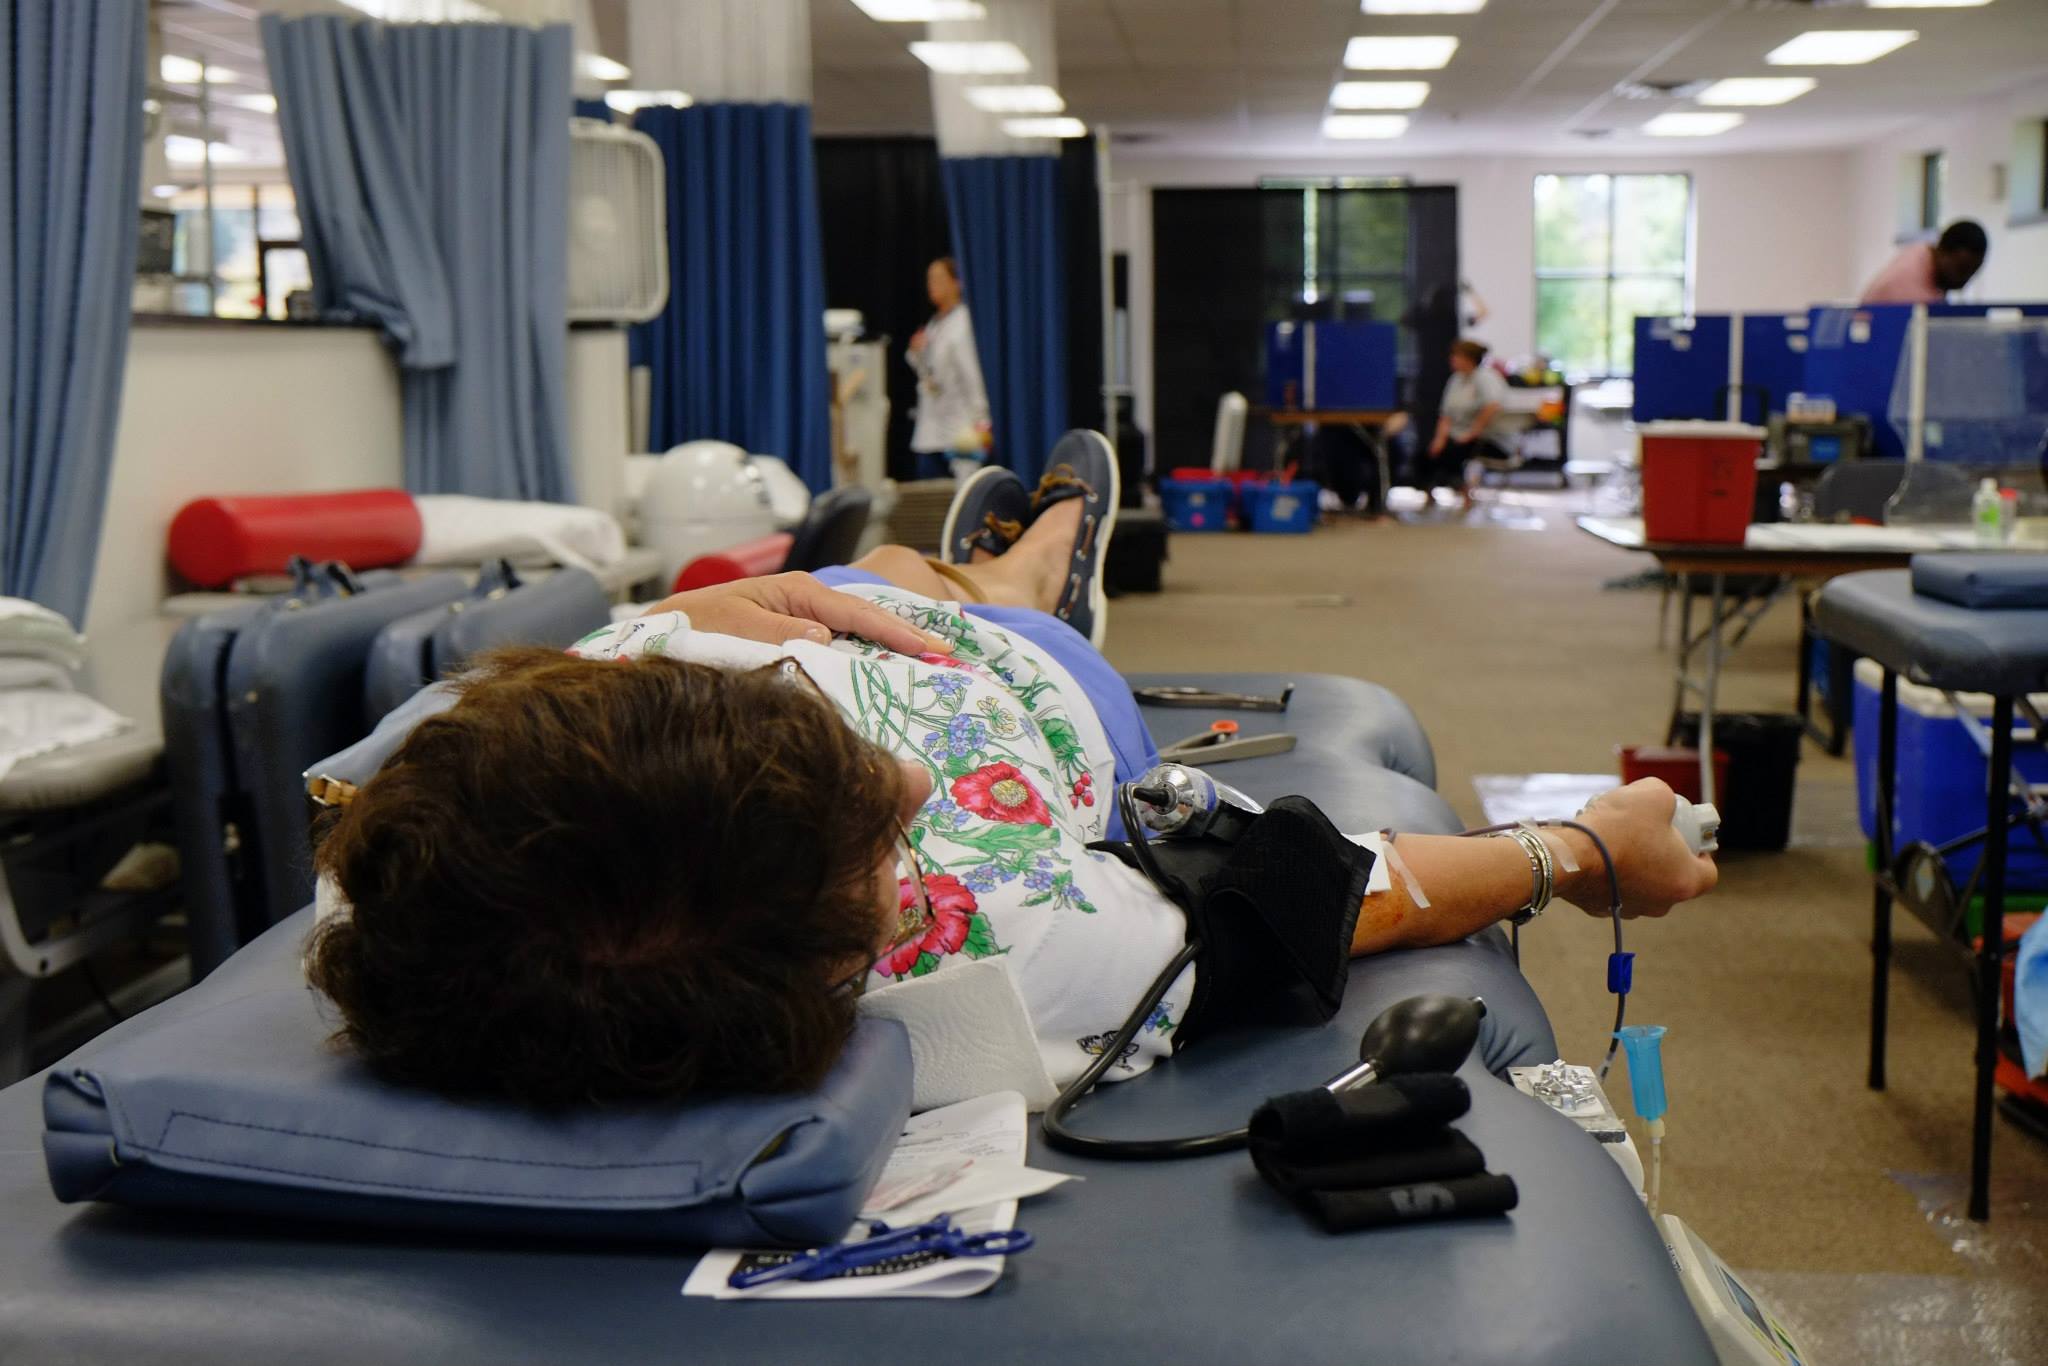 events_blooddrive_donating